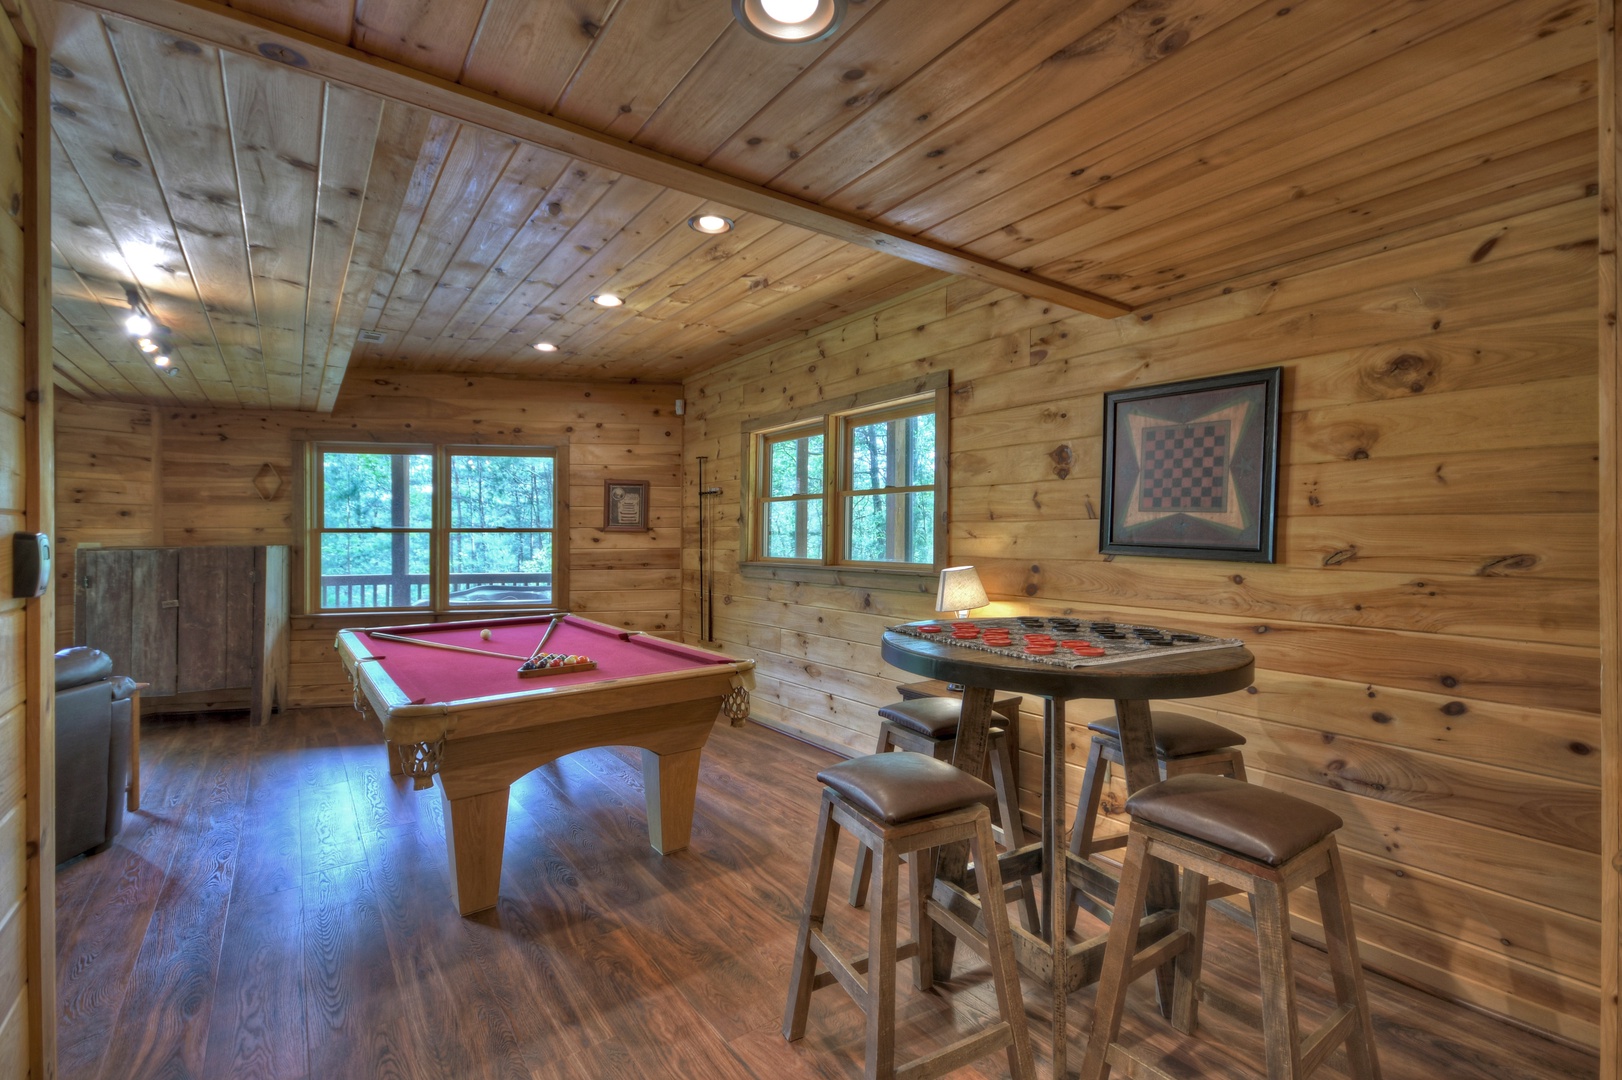 Aska Lodge- Lower level entertainment area with a pool table and card table and stools